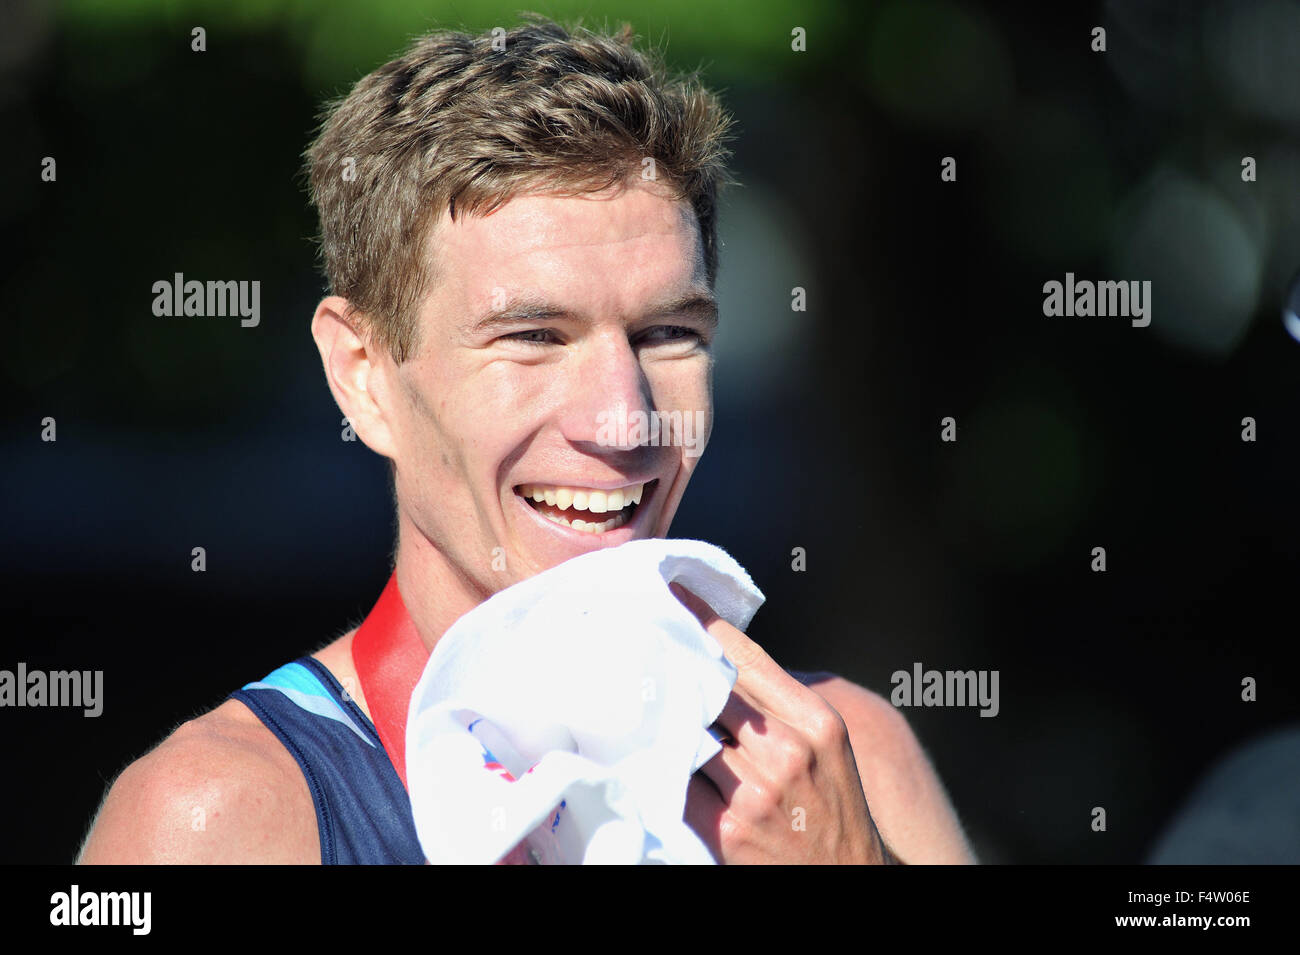 After crossing the finish line at the 2015 Chicago Marathon, Luke Puskedra of the United States appears refreshed and happy. Stock Photo